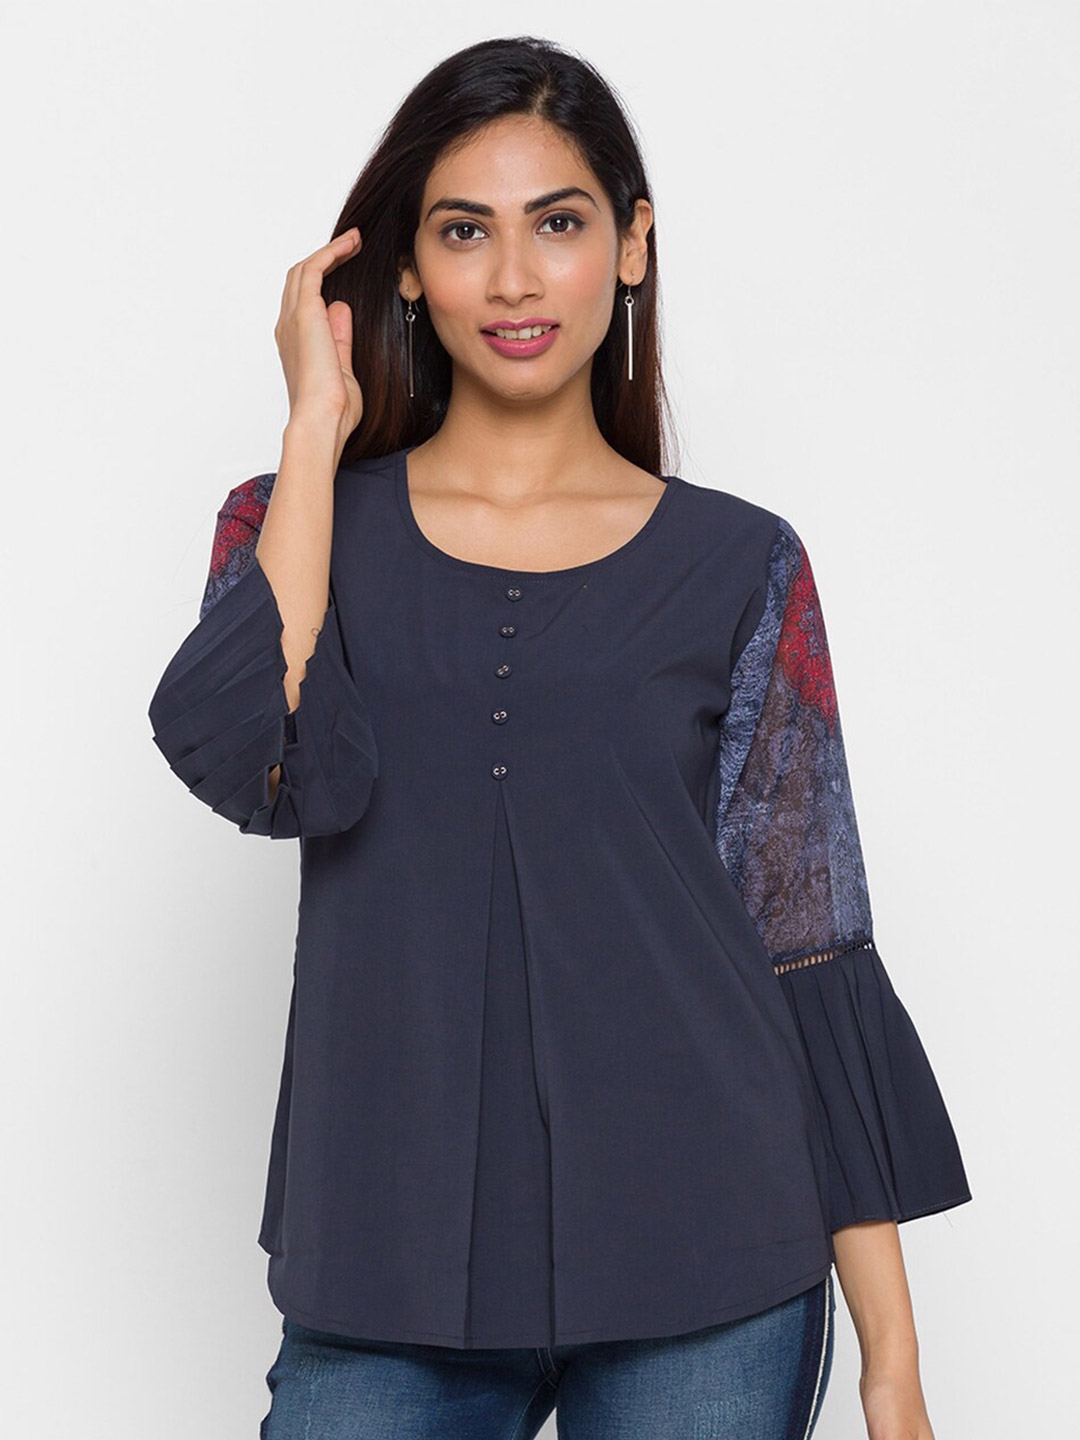 ZOLA Grey Chiffon Solid Bell Sleeves Casual Top